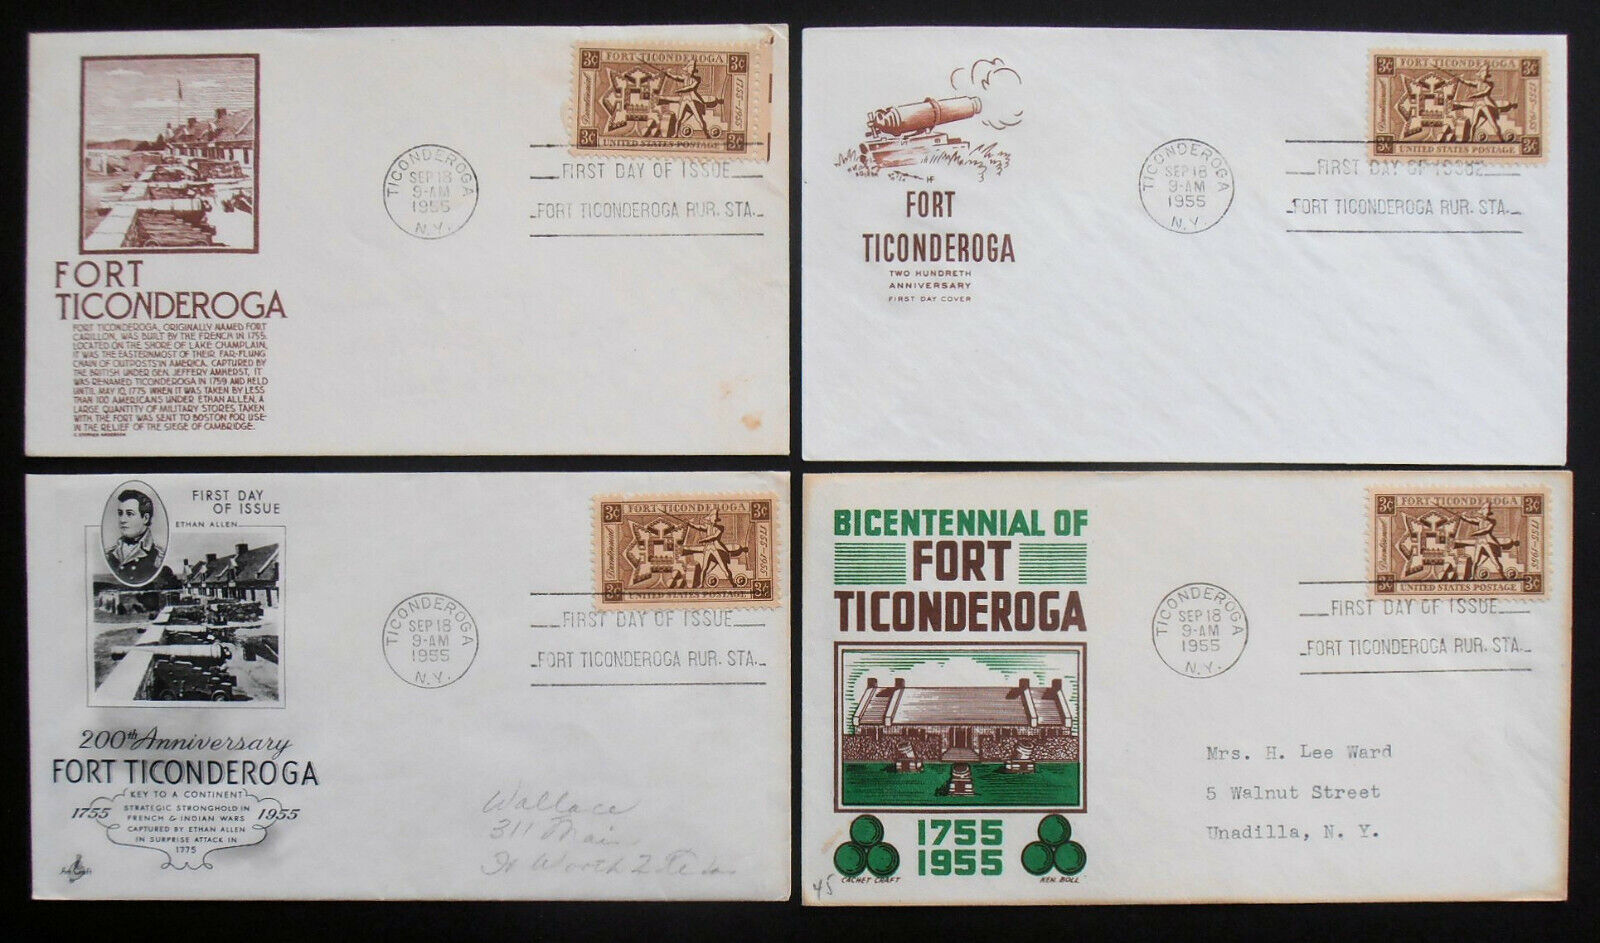 FORT TICONDEROGA NY Set of 4 Different 1955 SOUVENIR FDC CACHET CRAFT COVERS